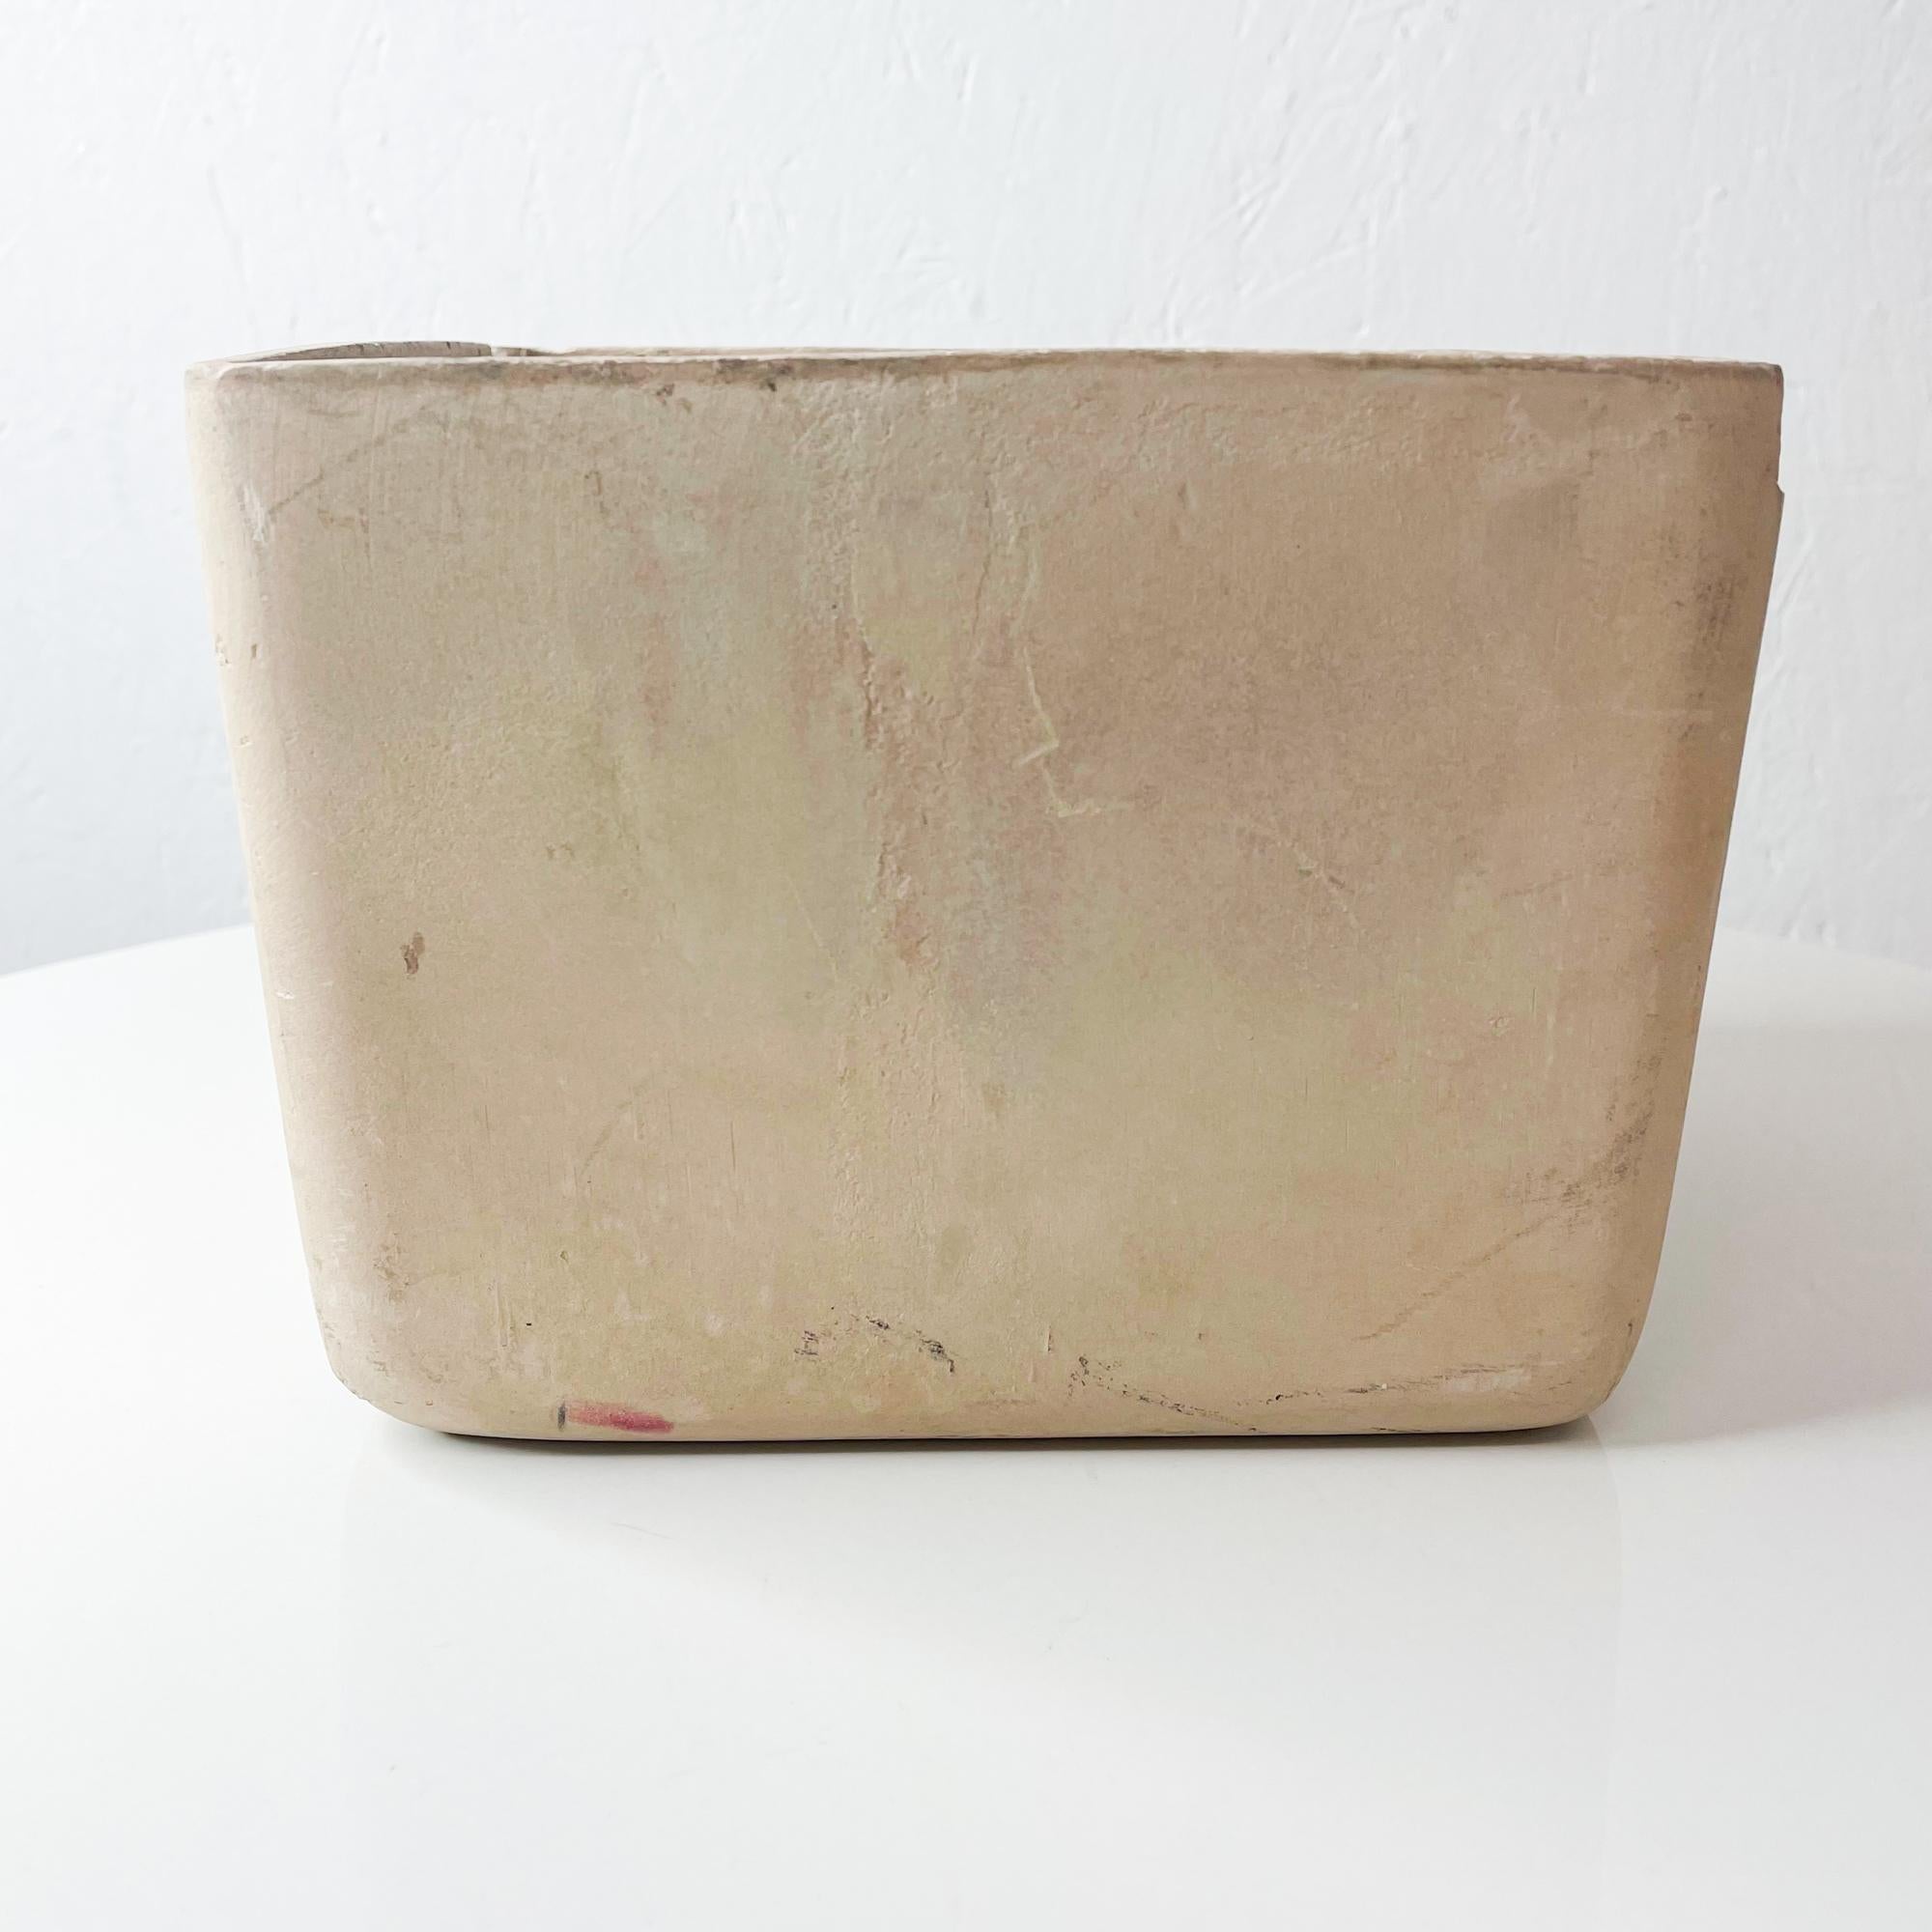 Square Modern Planter
Good looking midcentury Cream Bisque Pottery Planter attributed to John Follis designs for Architectural Pottery
Stamped underneath with makers logo ADAM Ceramics USA.
Measures: 7.25 x 7.25 x 5.5 Tall inches
Unrestored